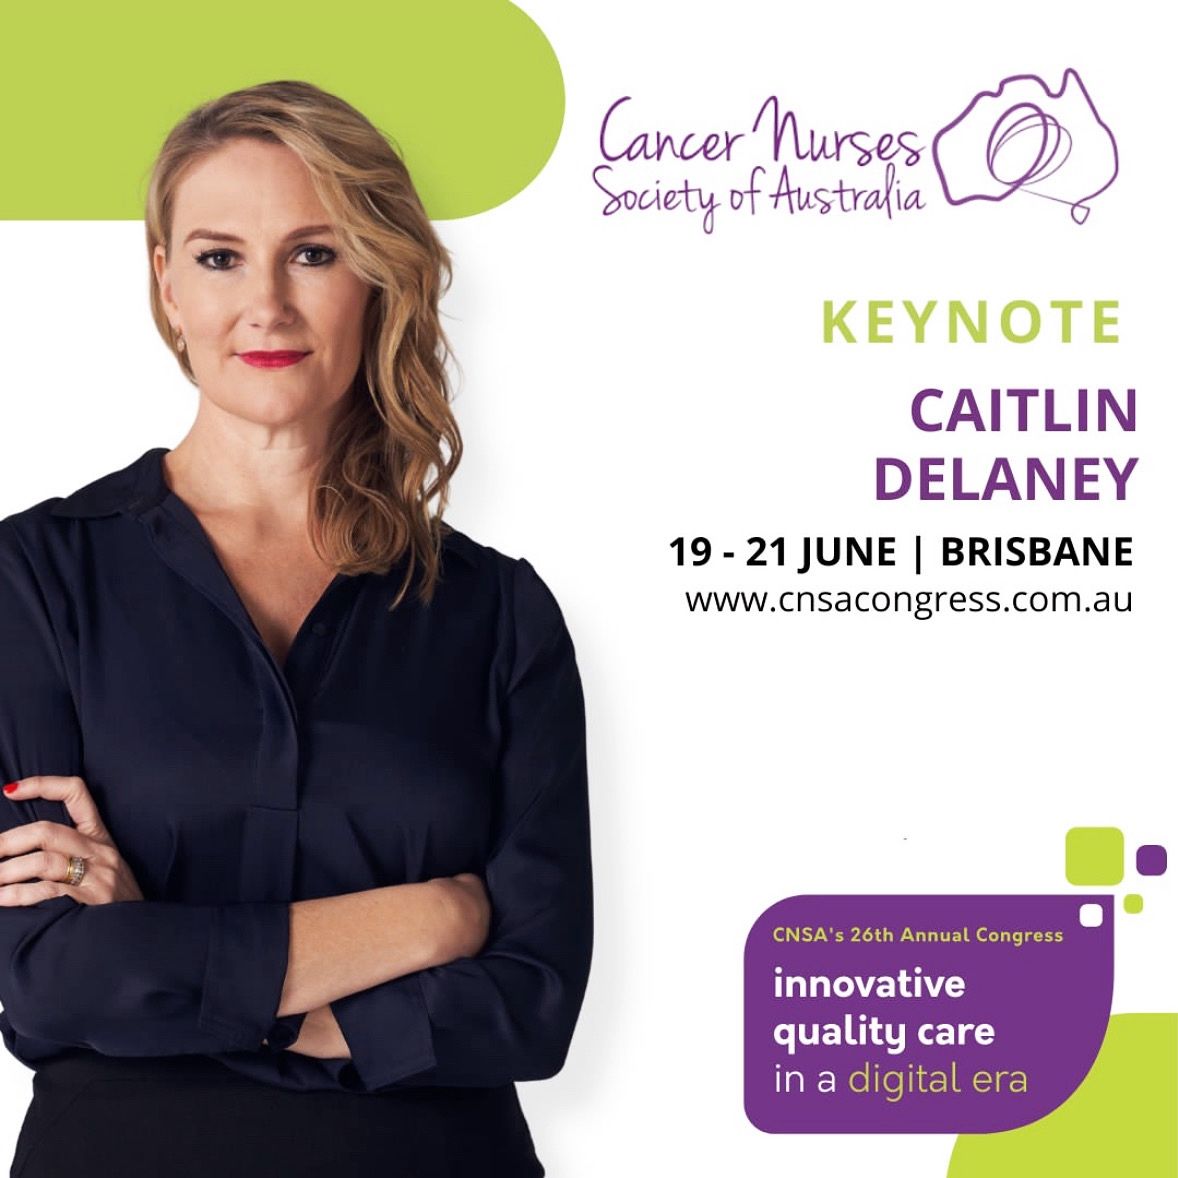 Caitlin Delaney: Speaking at the Cancer Nurses Society of Australia Congress